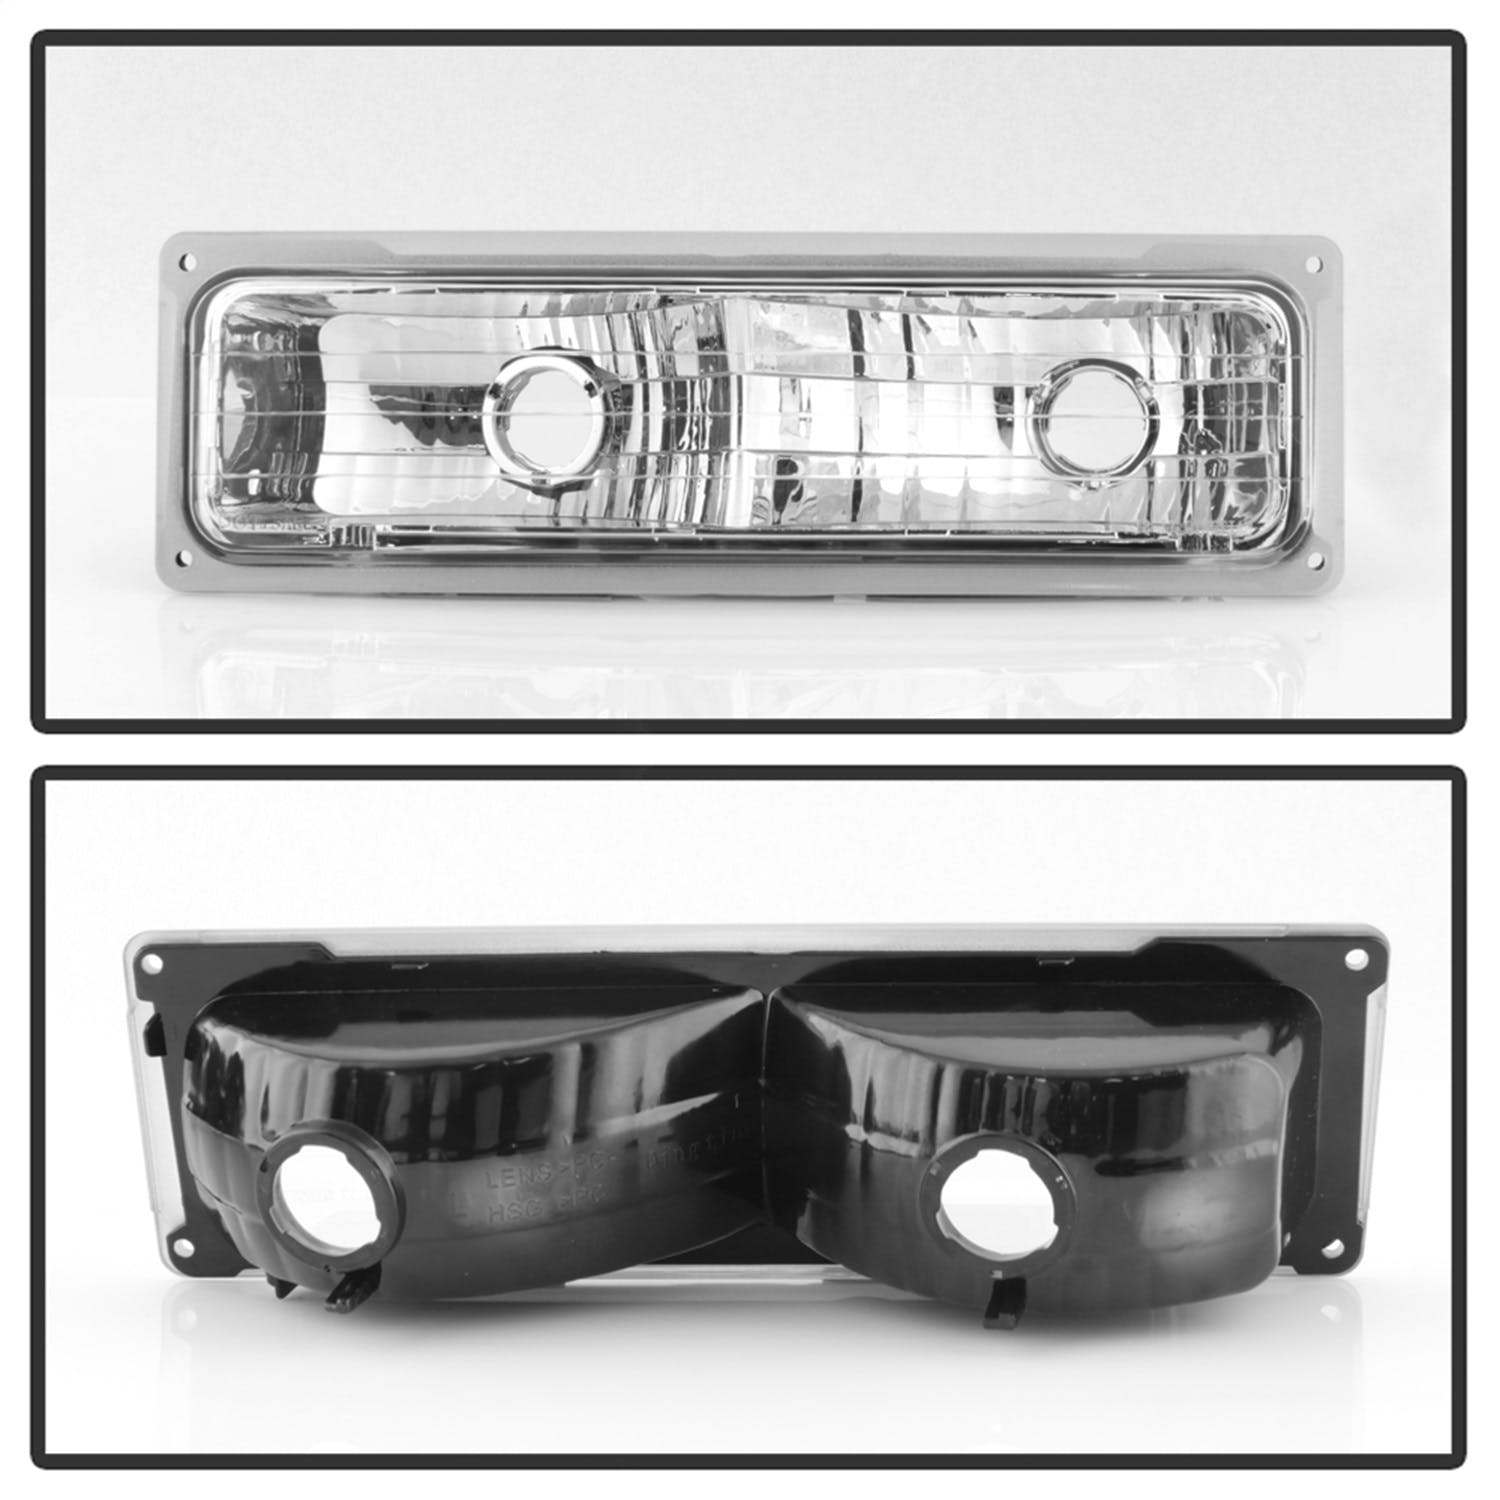 XTUNE POWER 5069535 Chevy C K Series 1500 2500 3500 94 98 Chevy Tahoe 95 99 Chevy Silverado 94 98 Chevy Suburban 94 98 Chevy Suburban 94 98 ( Not Compatible With Seal Beam Headlight ) Headlights with Corner and Parking Lights 8pcs sets Chrome